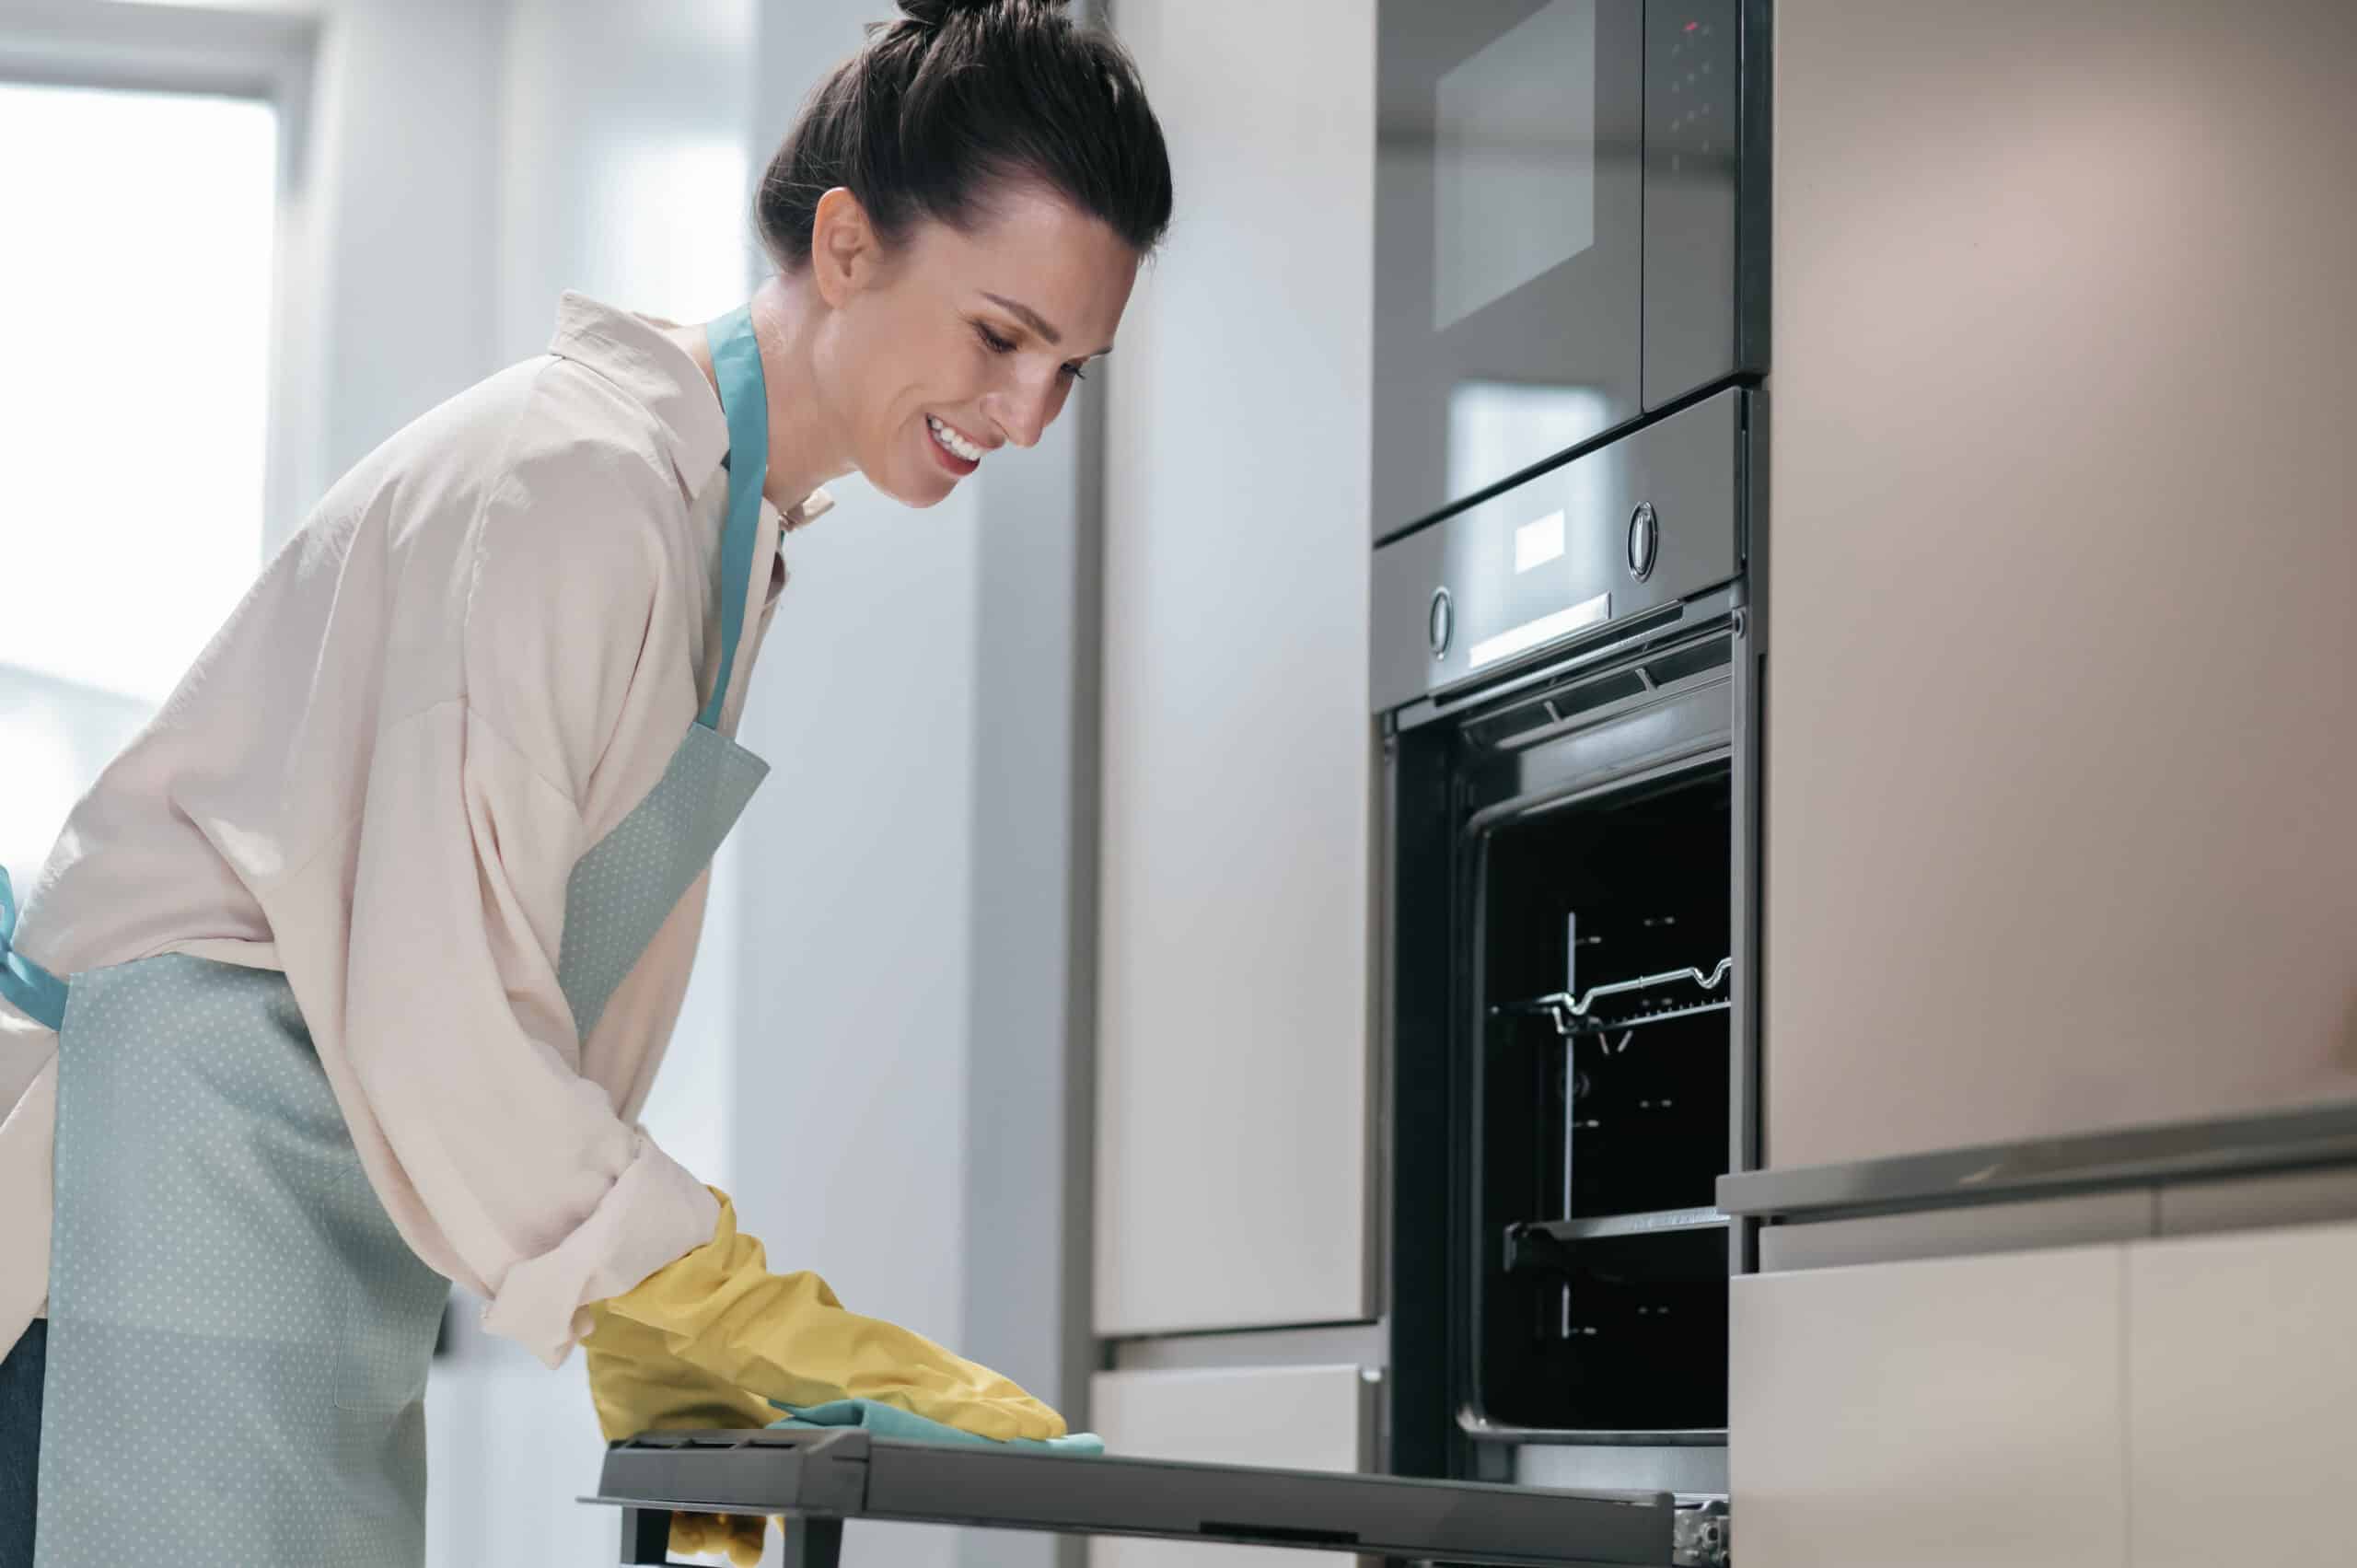 How to clean an Oven?